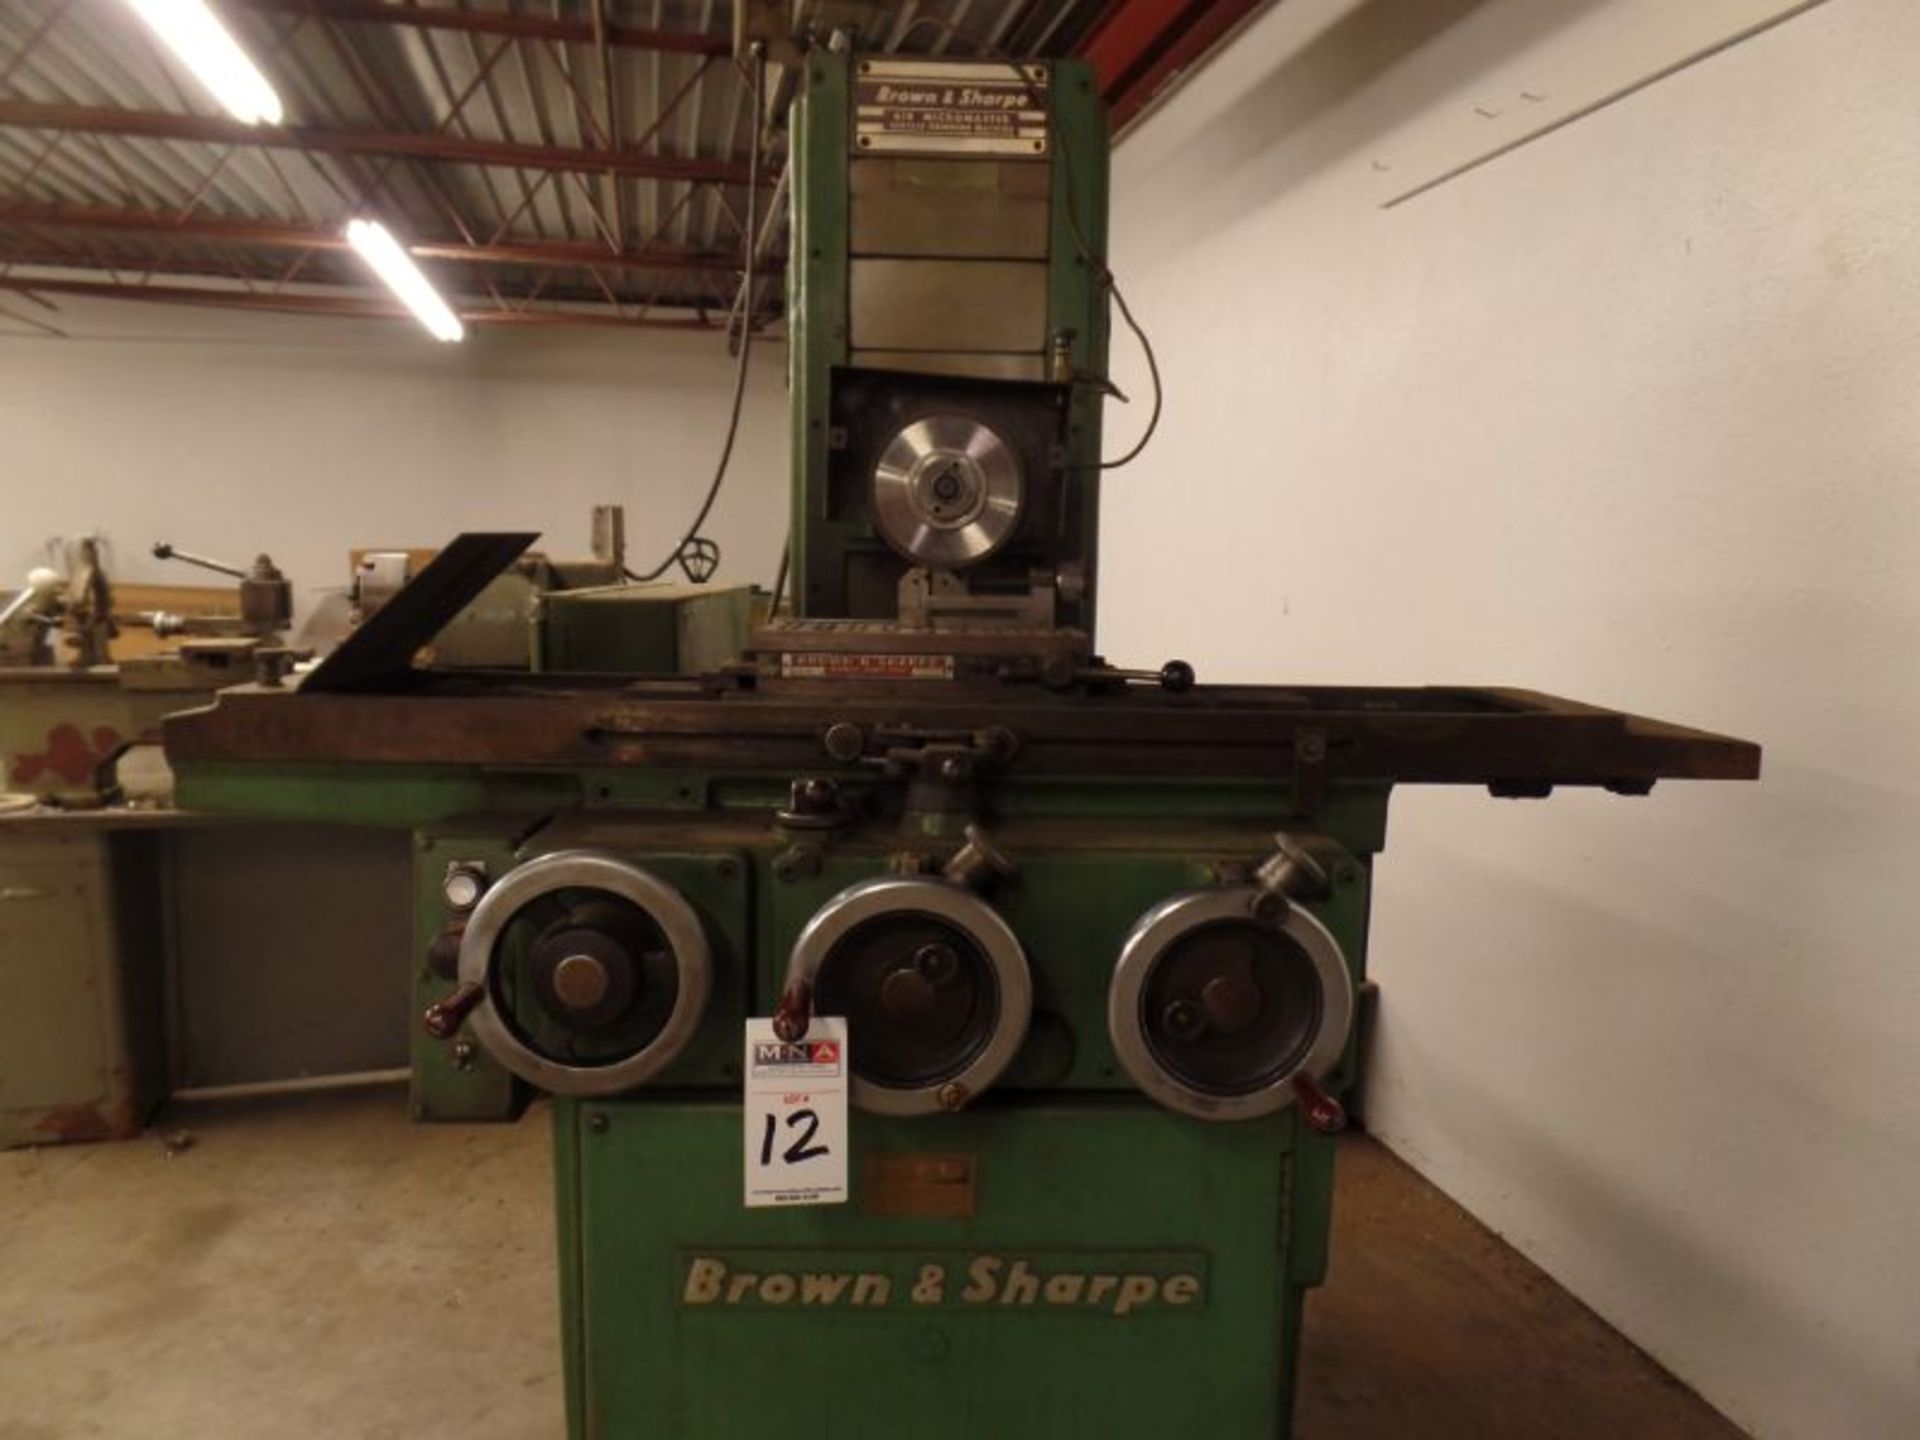 Brown & Sharpe 618 Micromaster Hyd. Surface Grinder, 6"x18" Magnetic Chuck, S/N 523-6181-797 - Image 5 of 10